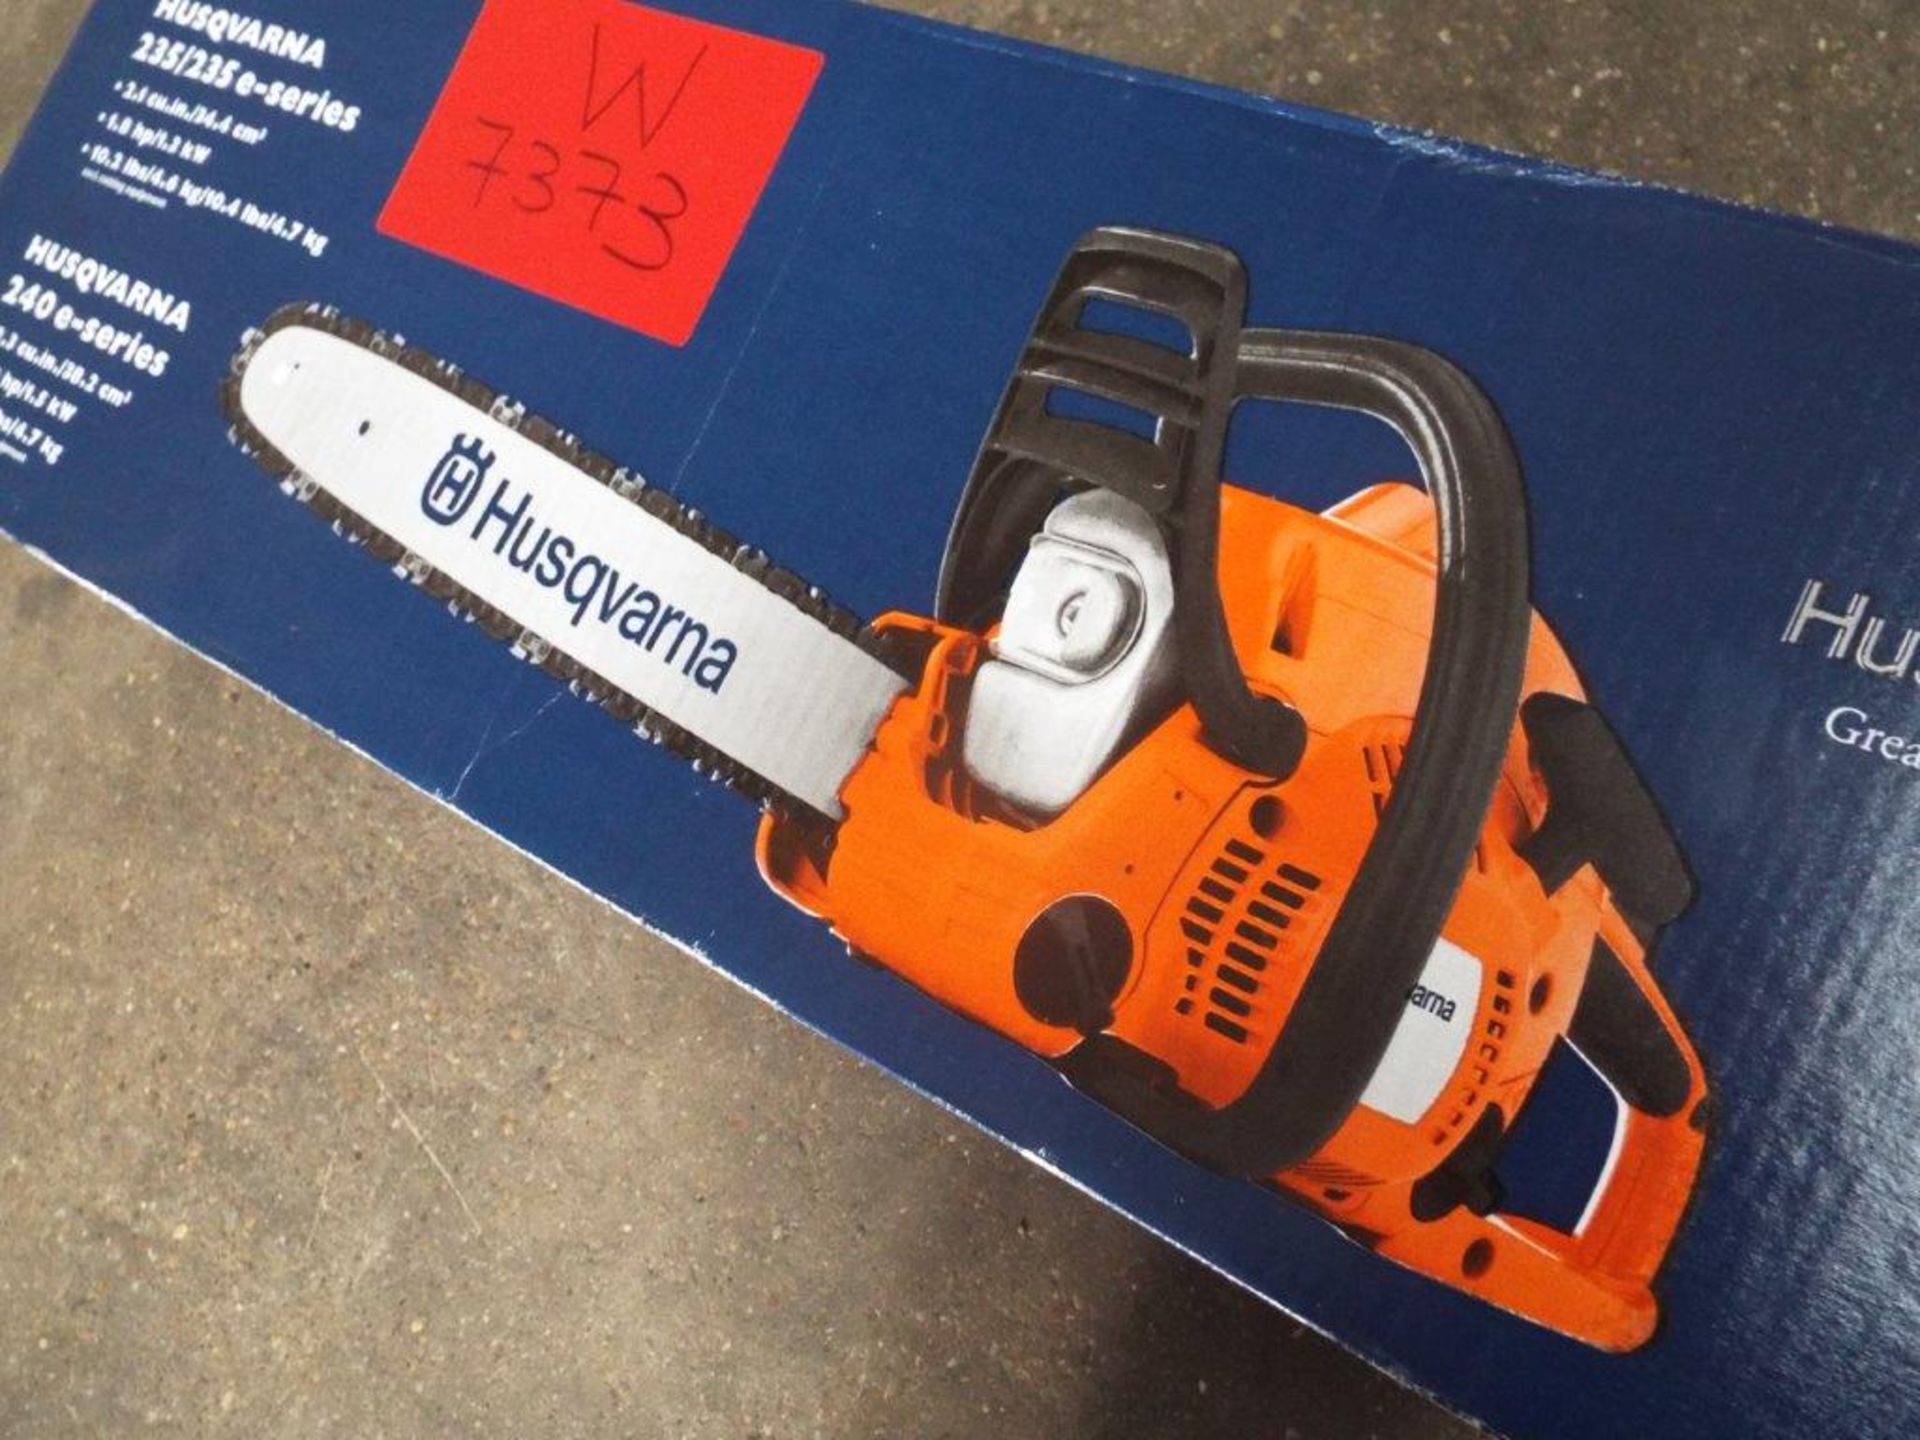 New Unused Husqvarna 240 E-Series Chainsaw with 16" Blade - Image 2 of 9